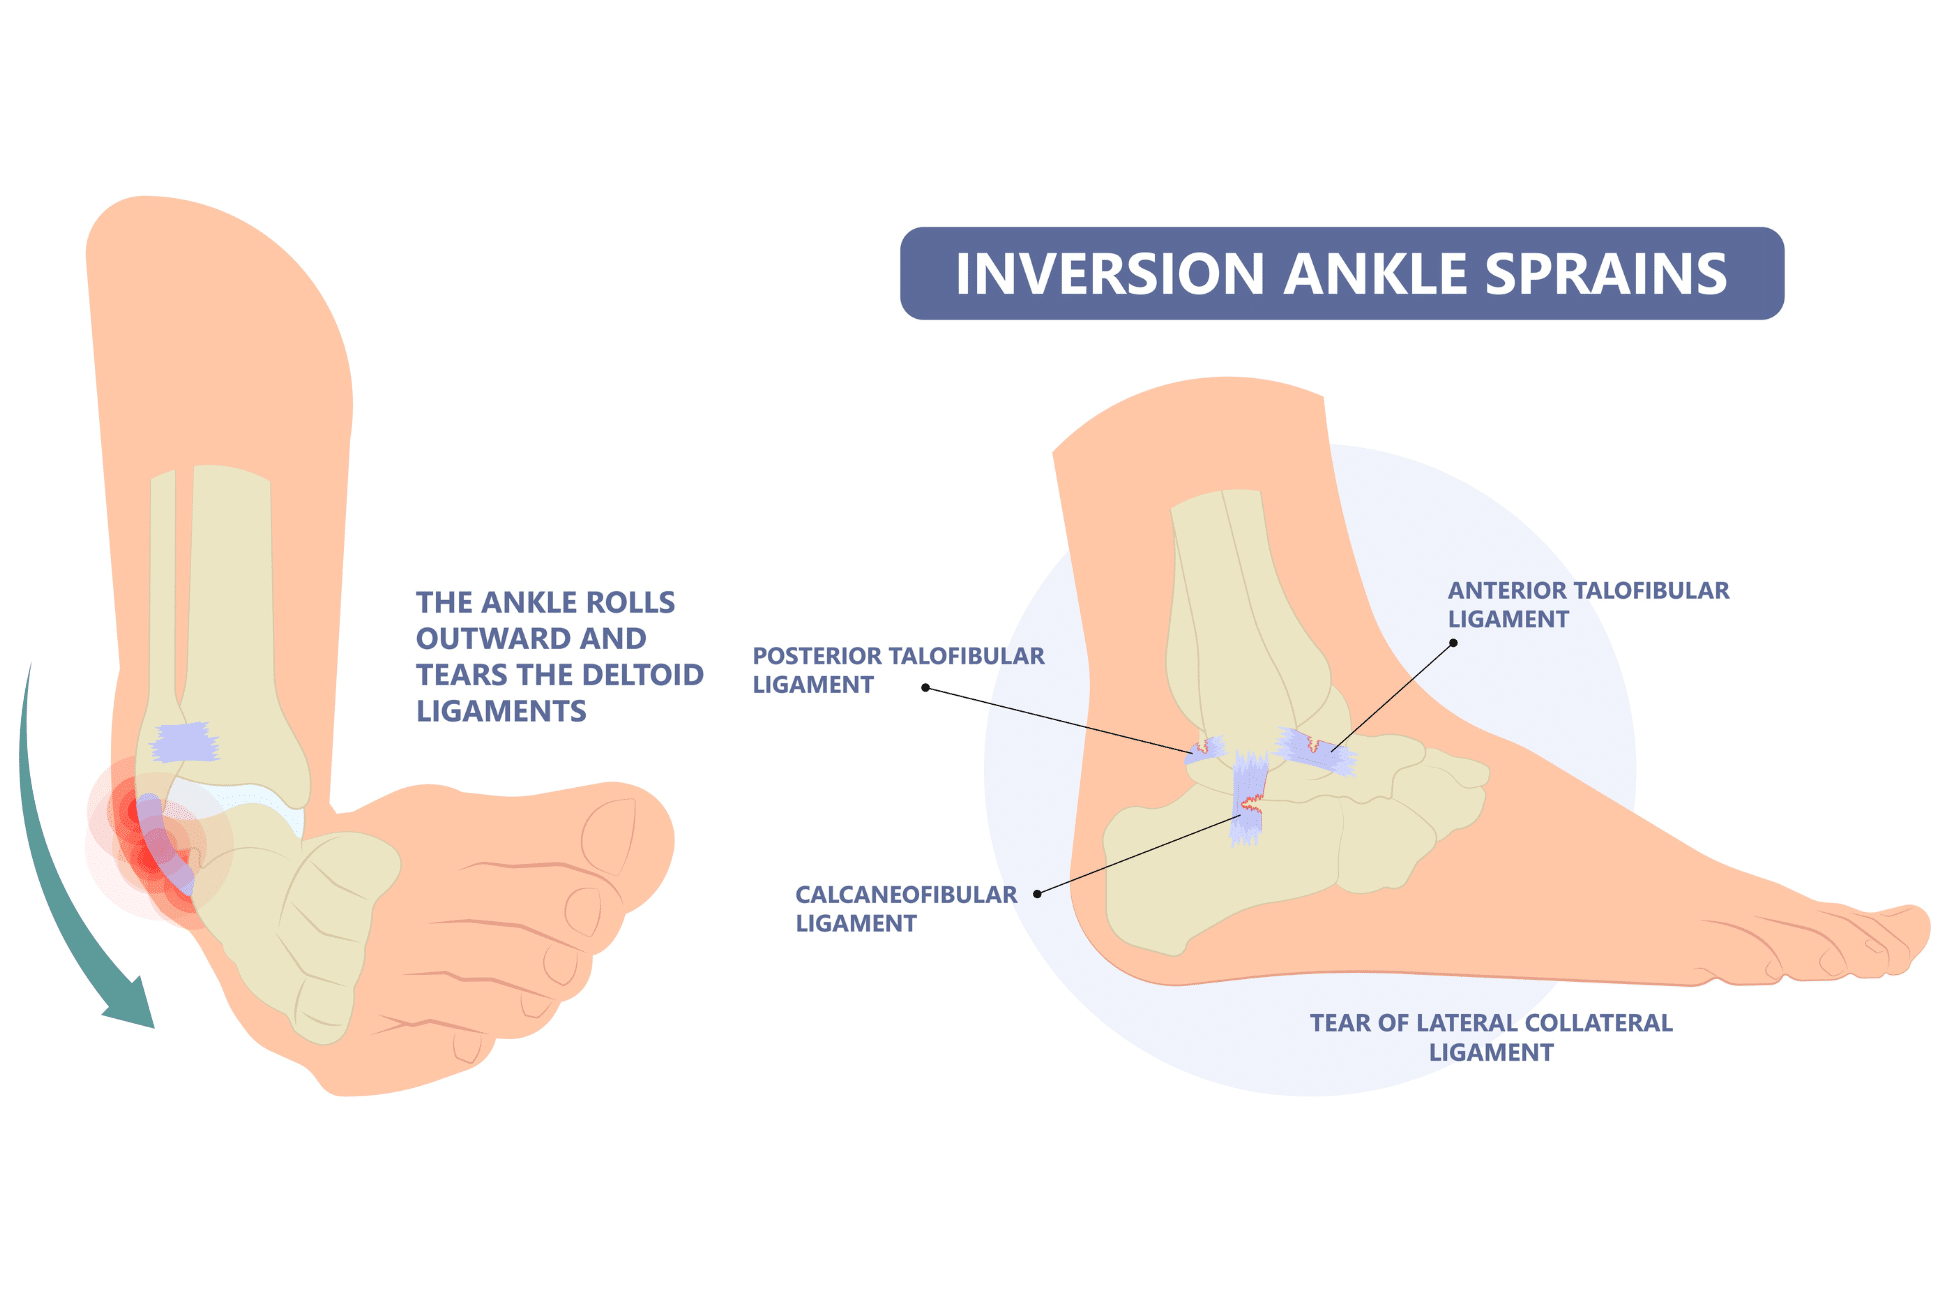 Sprained ankle healing time diagram, demonstrating the anatomy of an inversion ankle sprain by identifying lateral ankle ligaments and showing the outward rolling motion of this type of sprain.